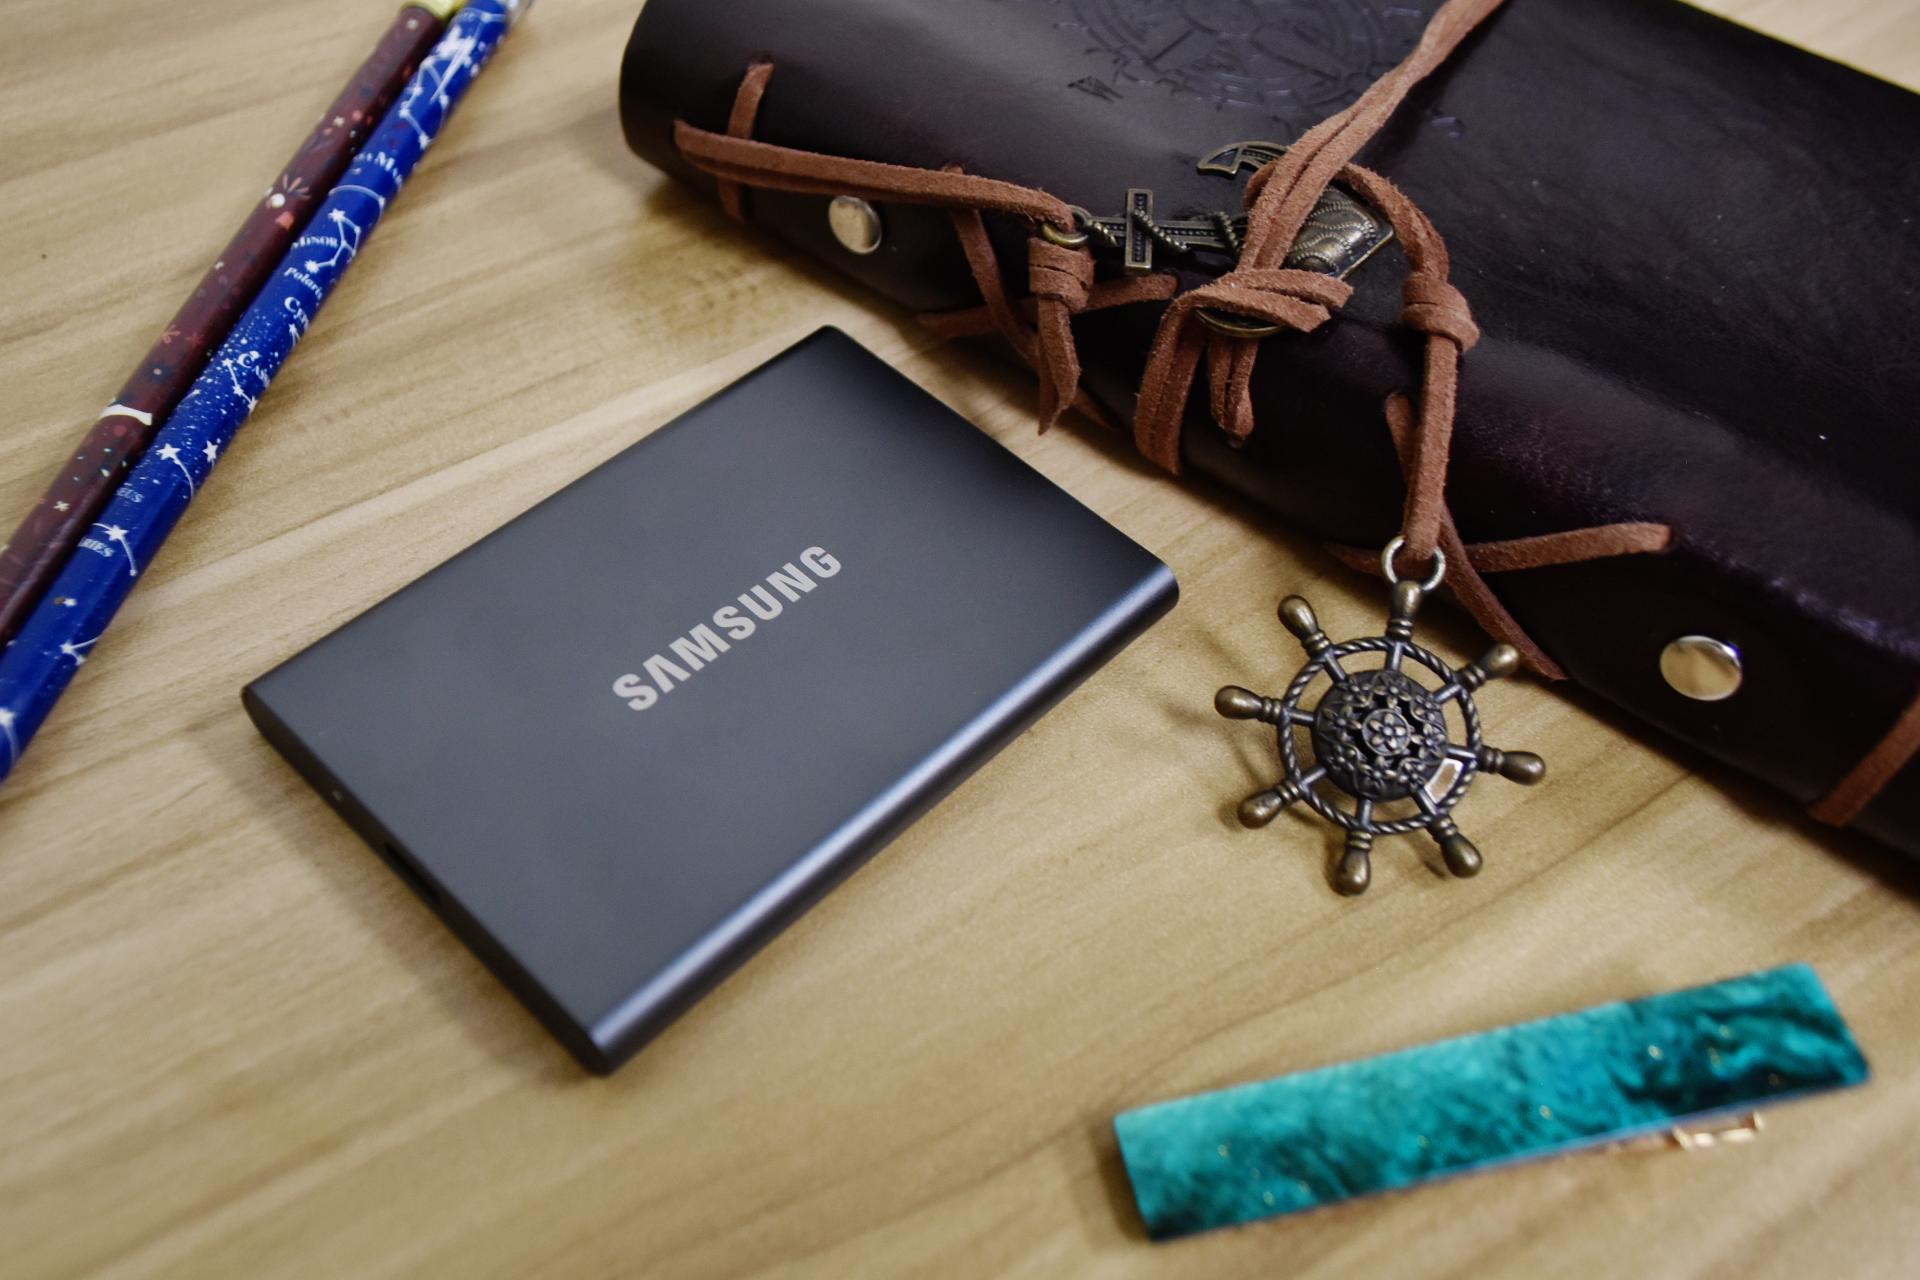 Samsung T7 Touch 500GB Portable SSD Review - Back2Gaming